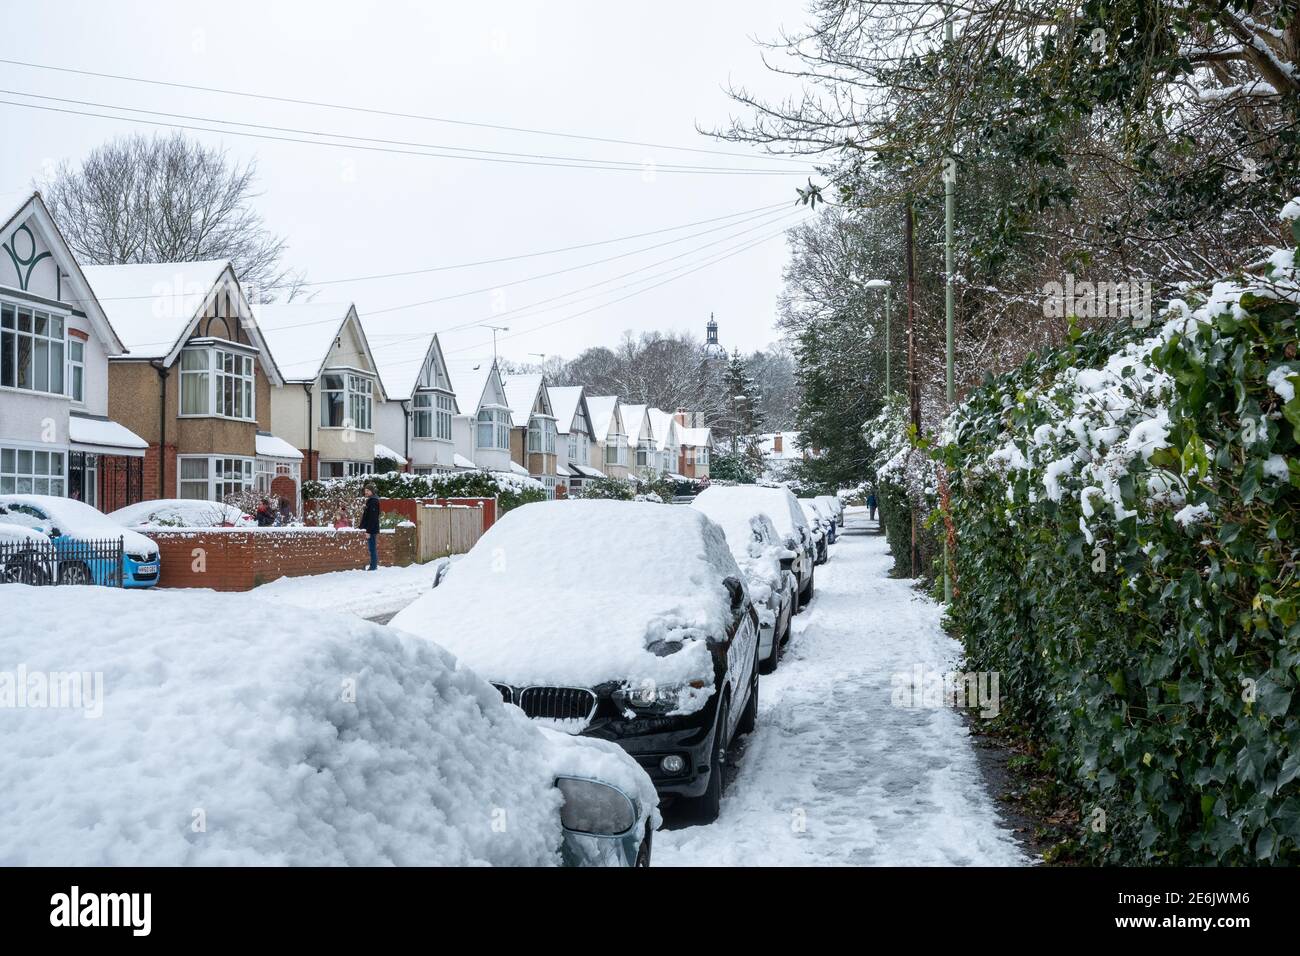 Snow covered houses and cars in Highgate Lane, Farnborough, Hampshire, UK, in January or winter Stock Photo